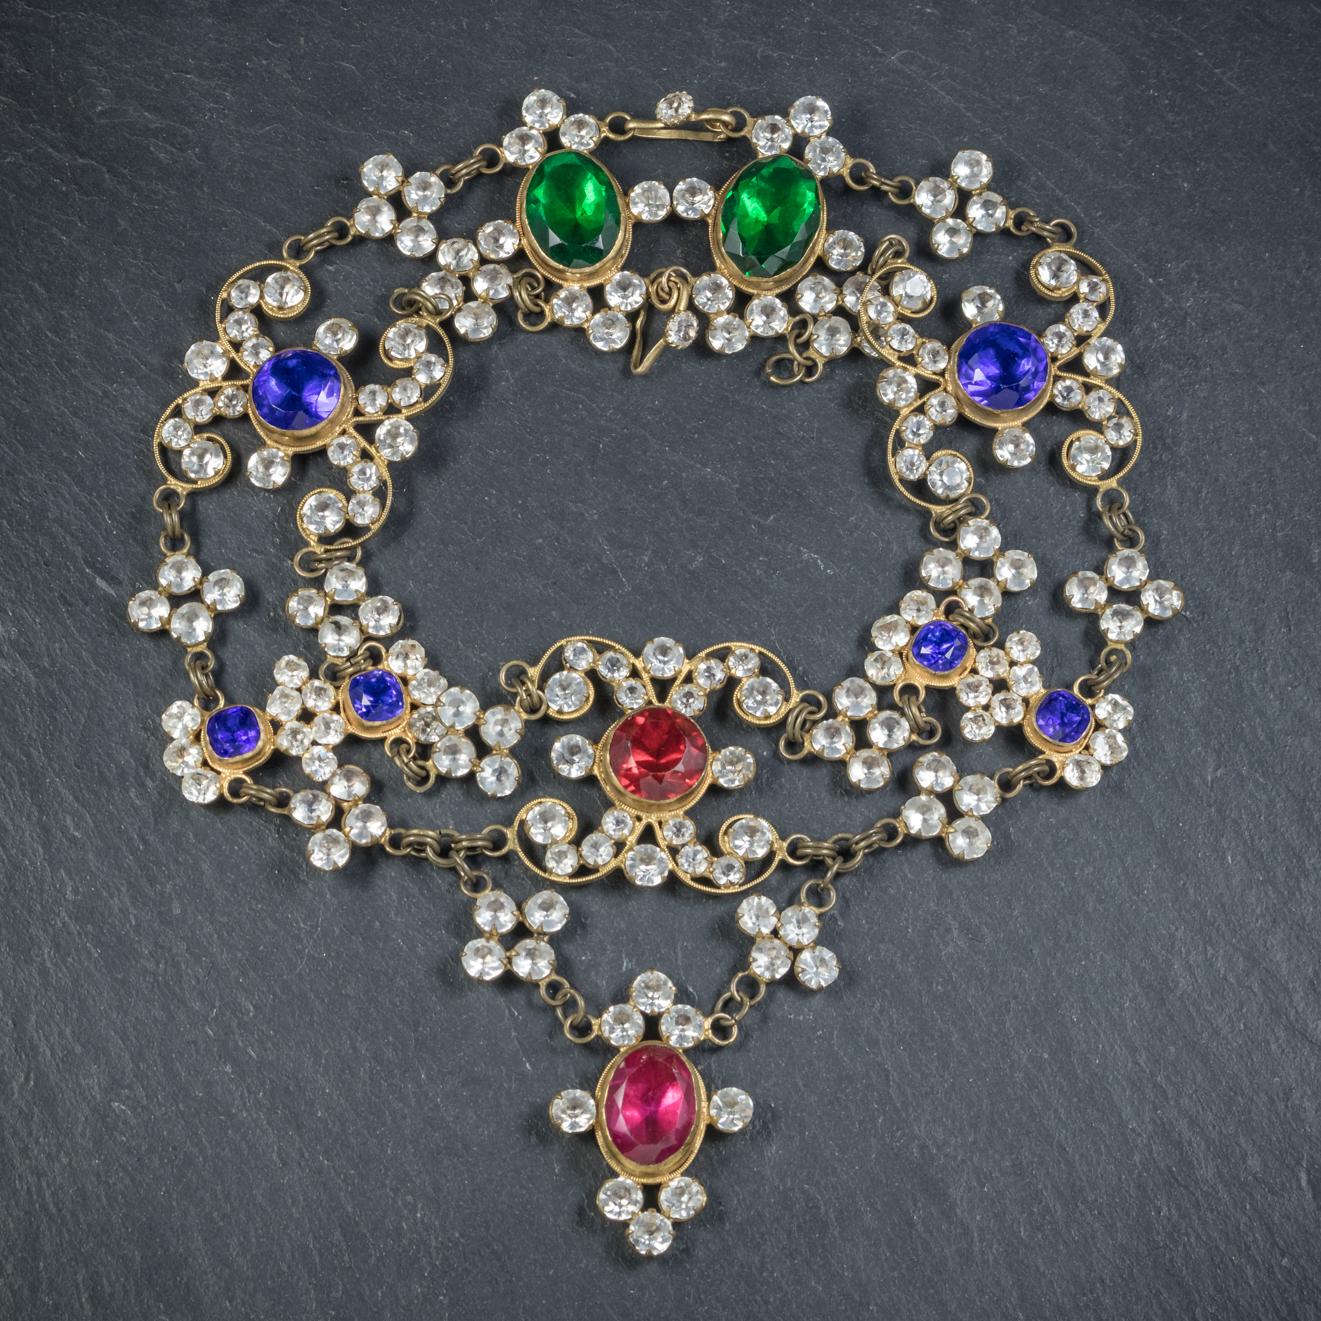 This spectacular large antique coloured Paste Stone necklace is Victorian, Circa 1900. 

The fabulous piece is made up of fancy golden links decorated in large green, blue and red Paste Stones with smaller white Pastes glistening in-between.

The